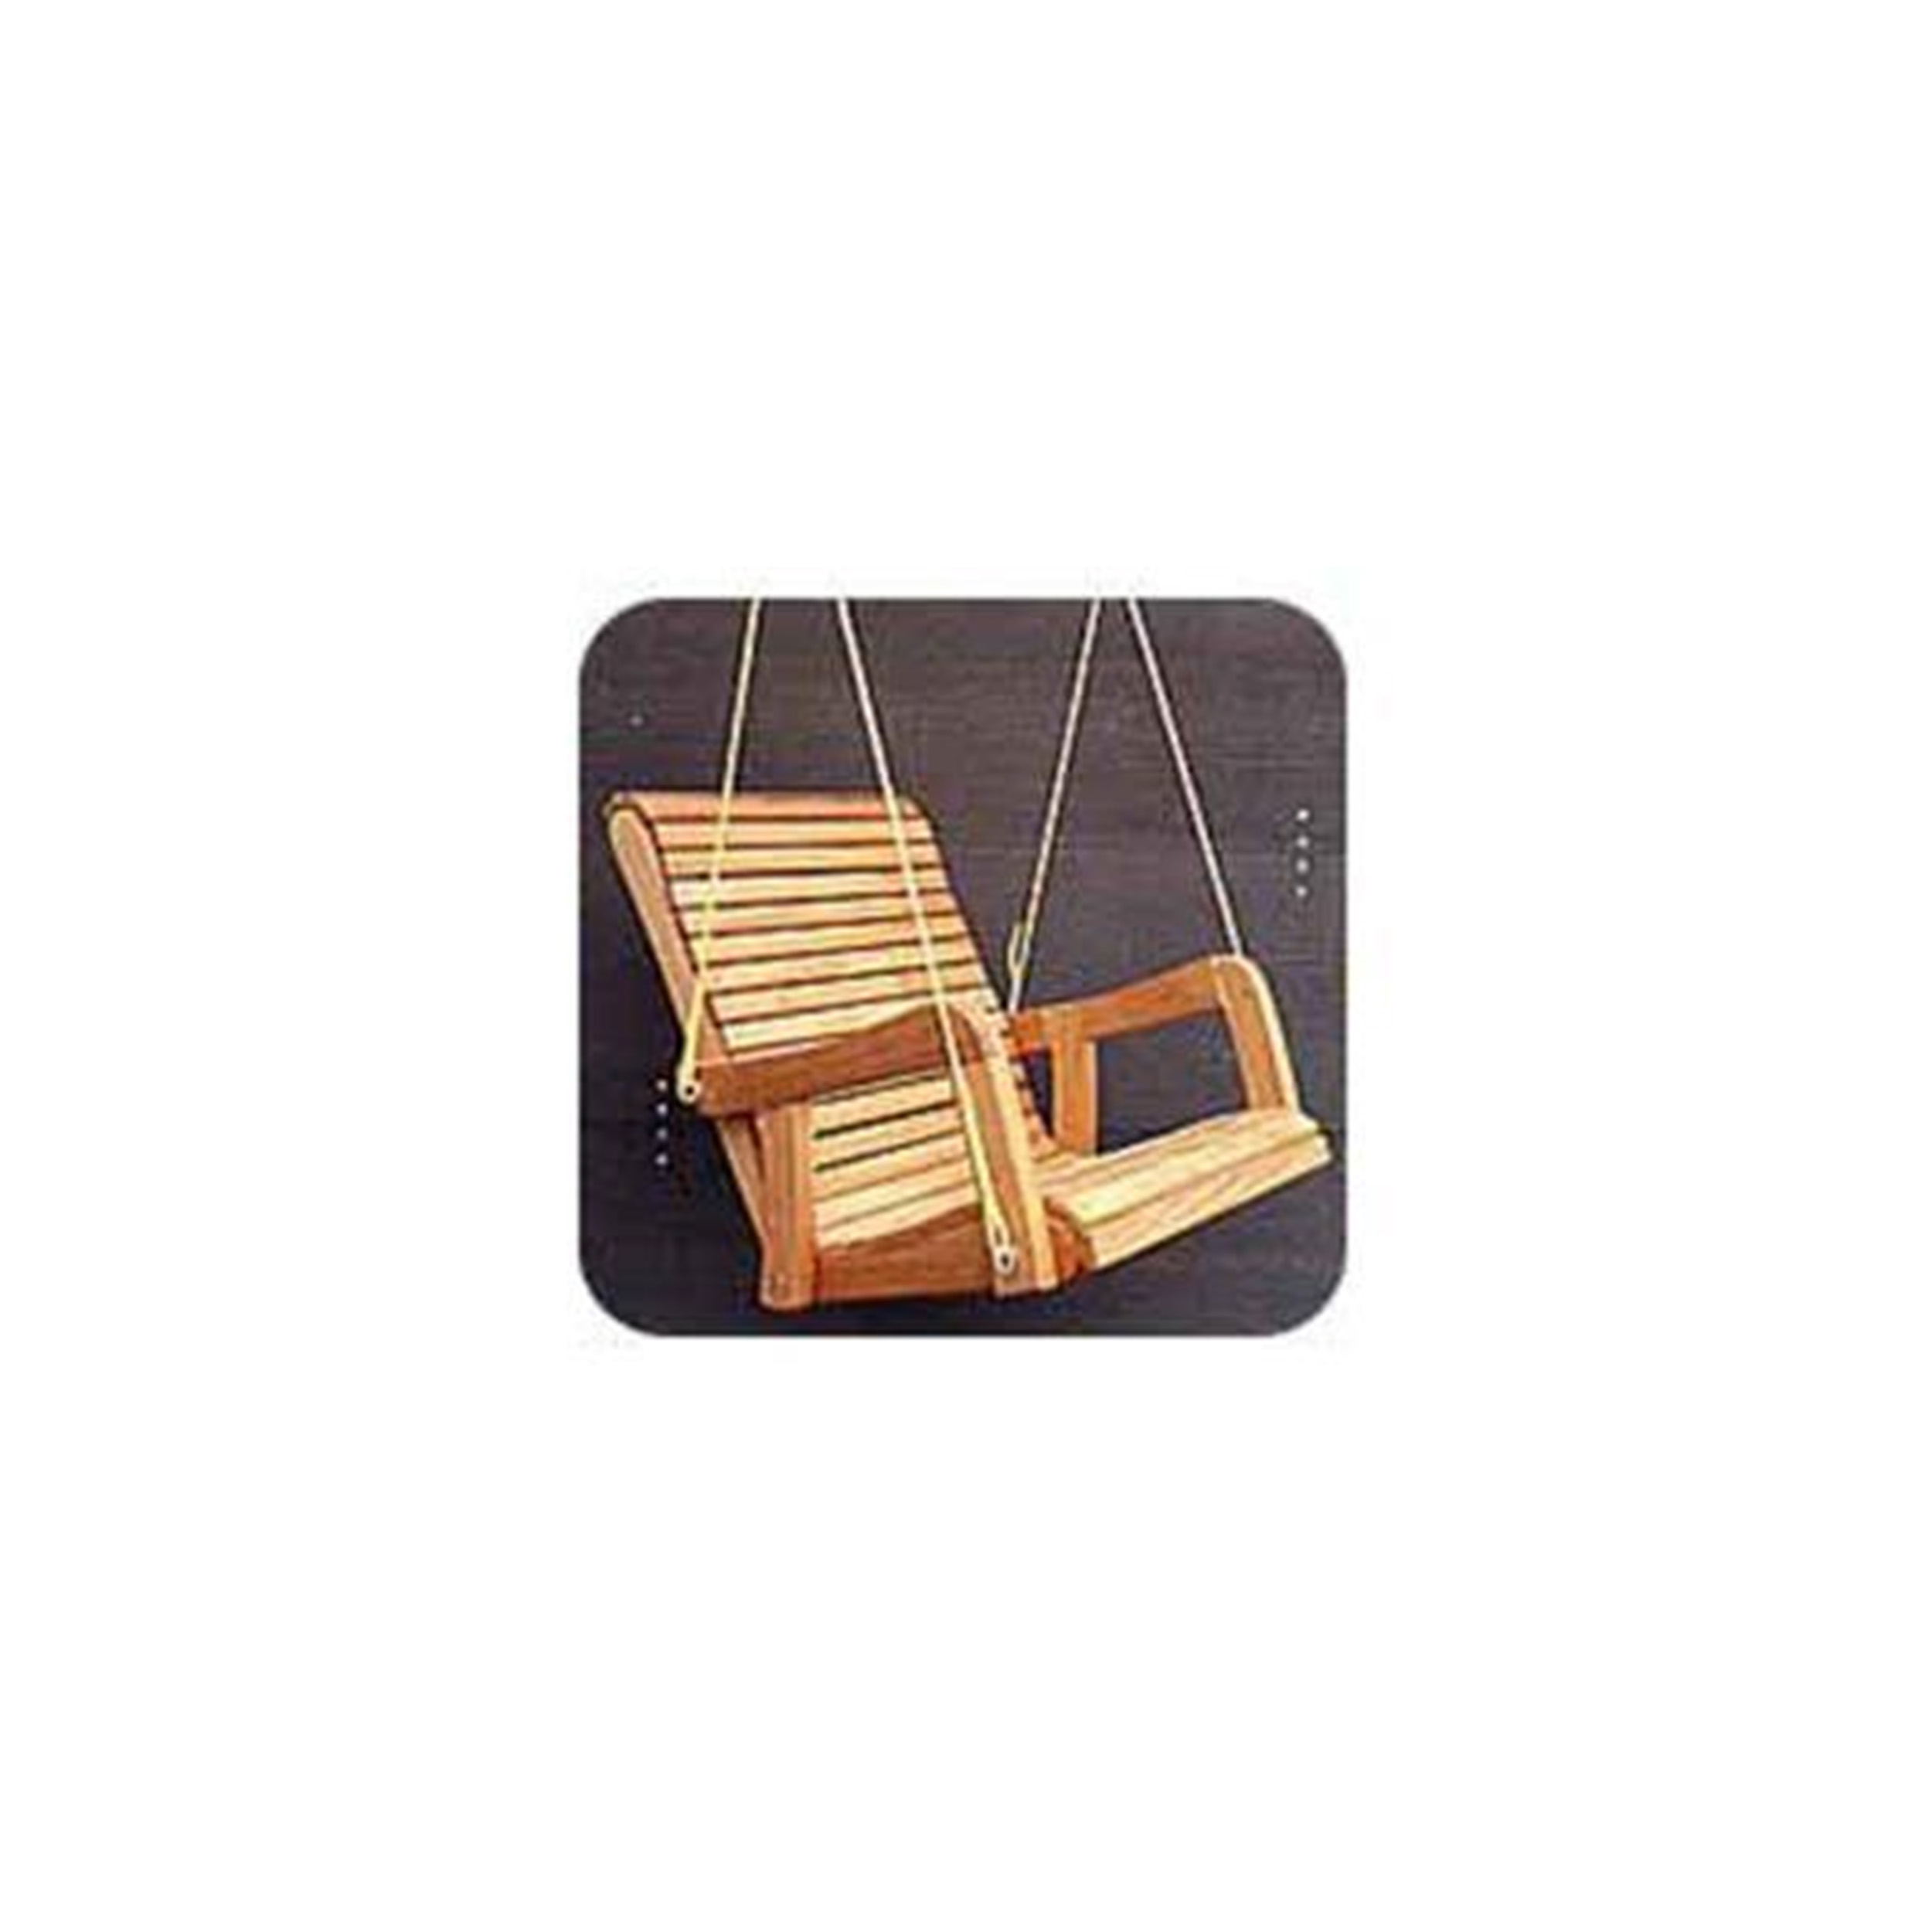 Woodworking Project Paper Plan To Build Hanging Chair